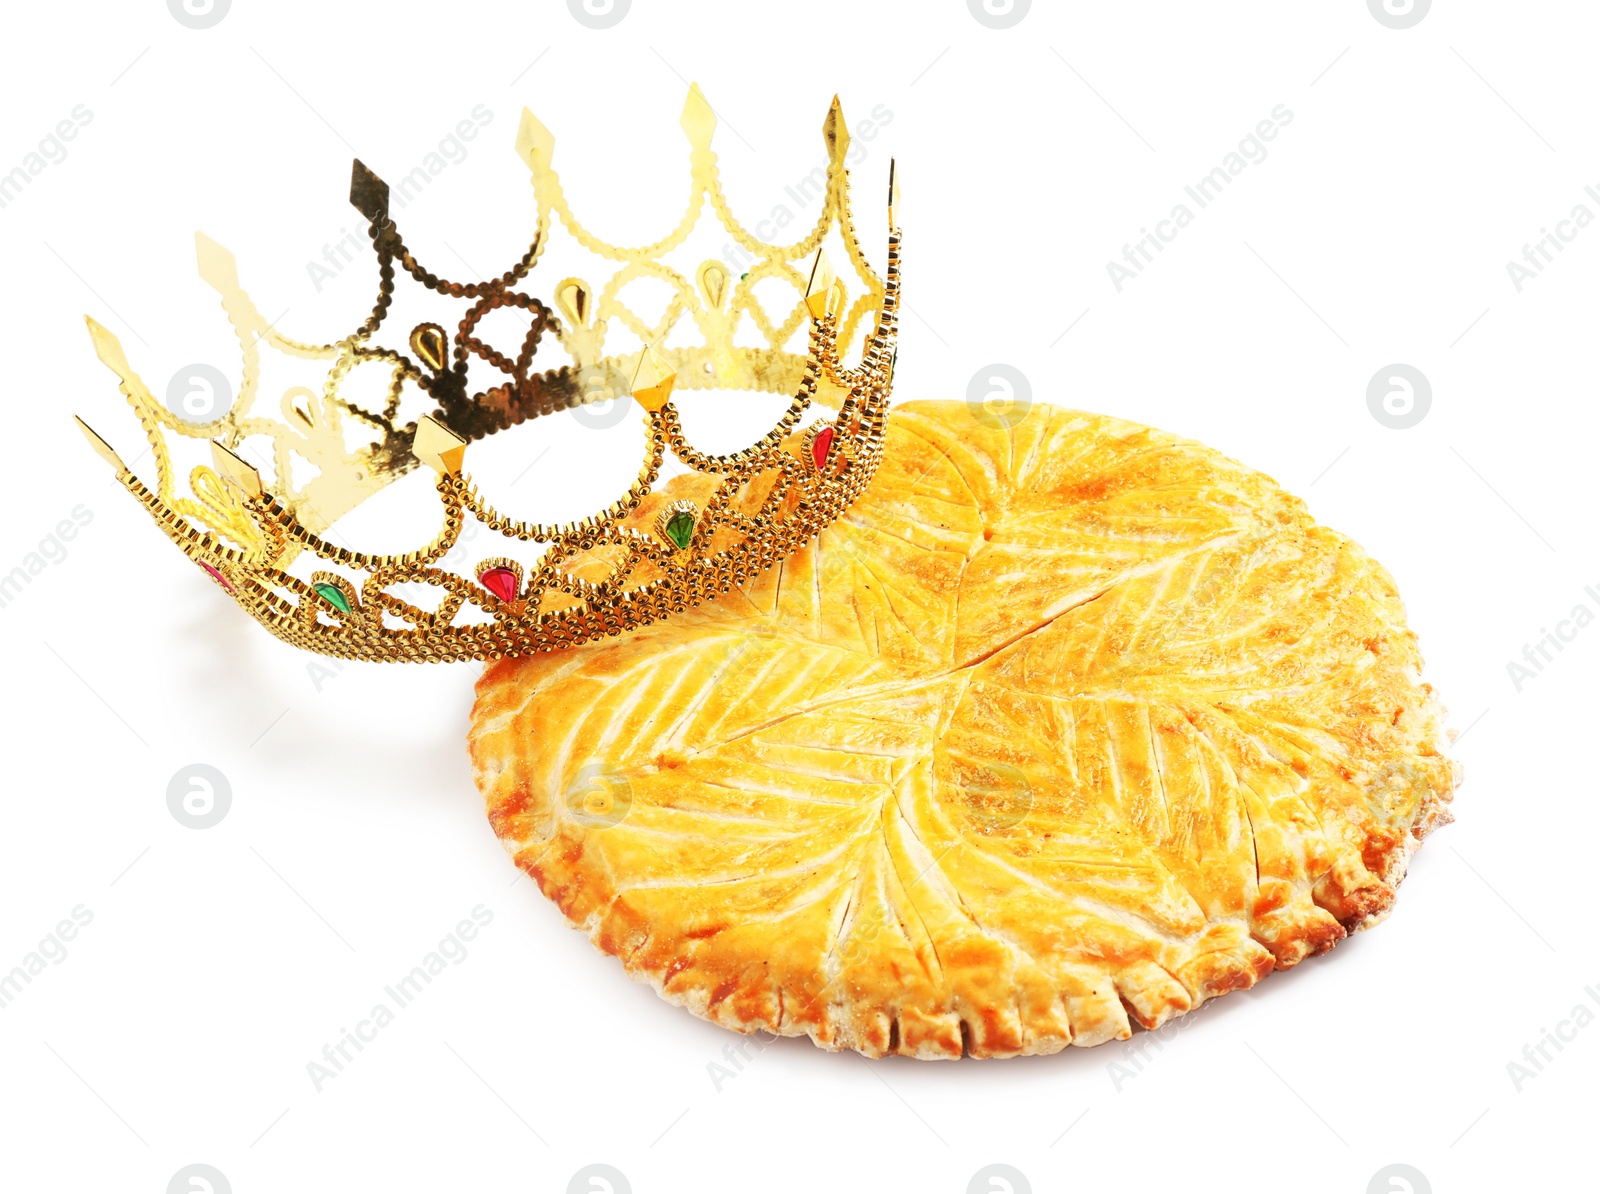 Photo of Traditional galette des rois and decorative crown on white background